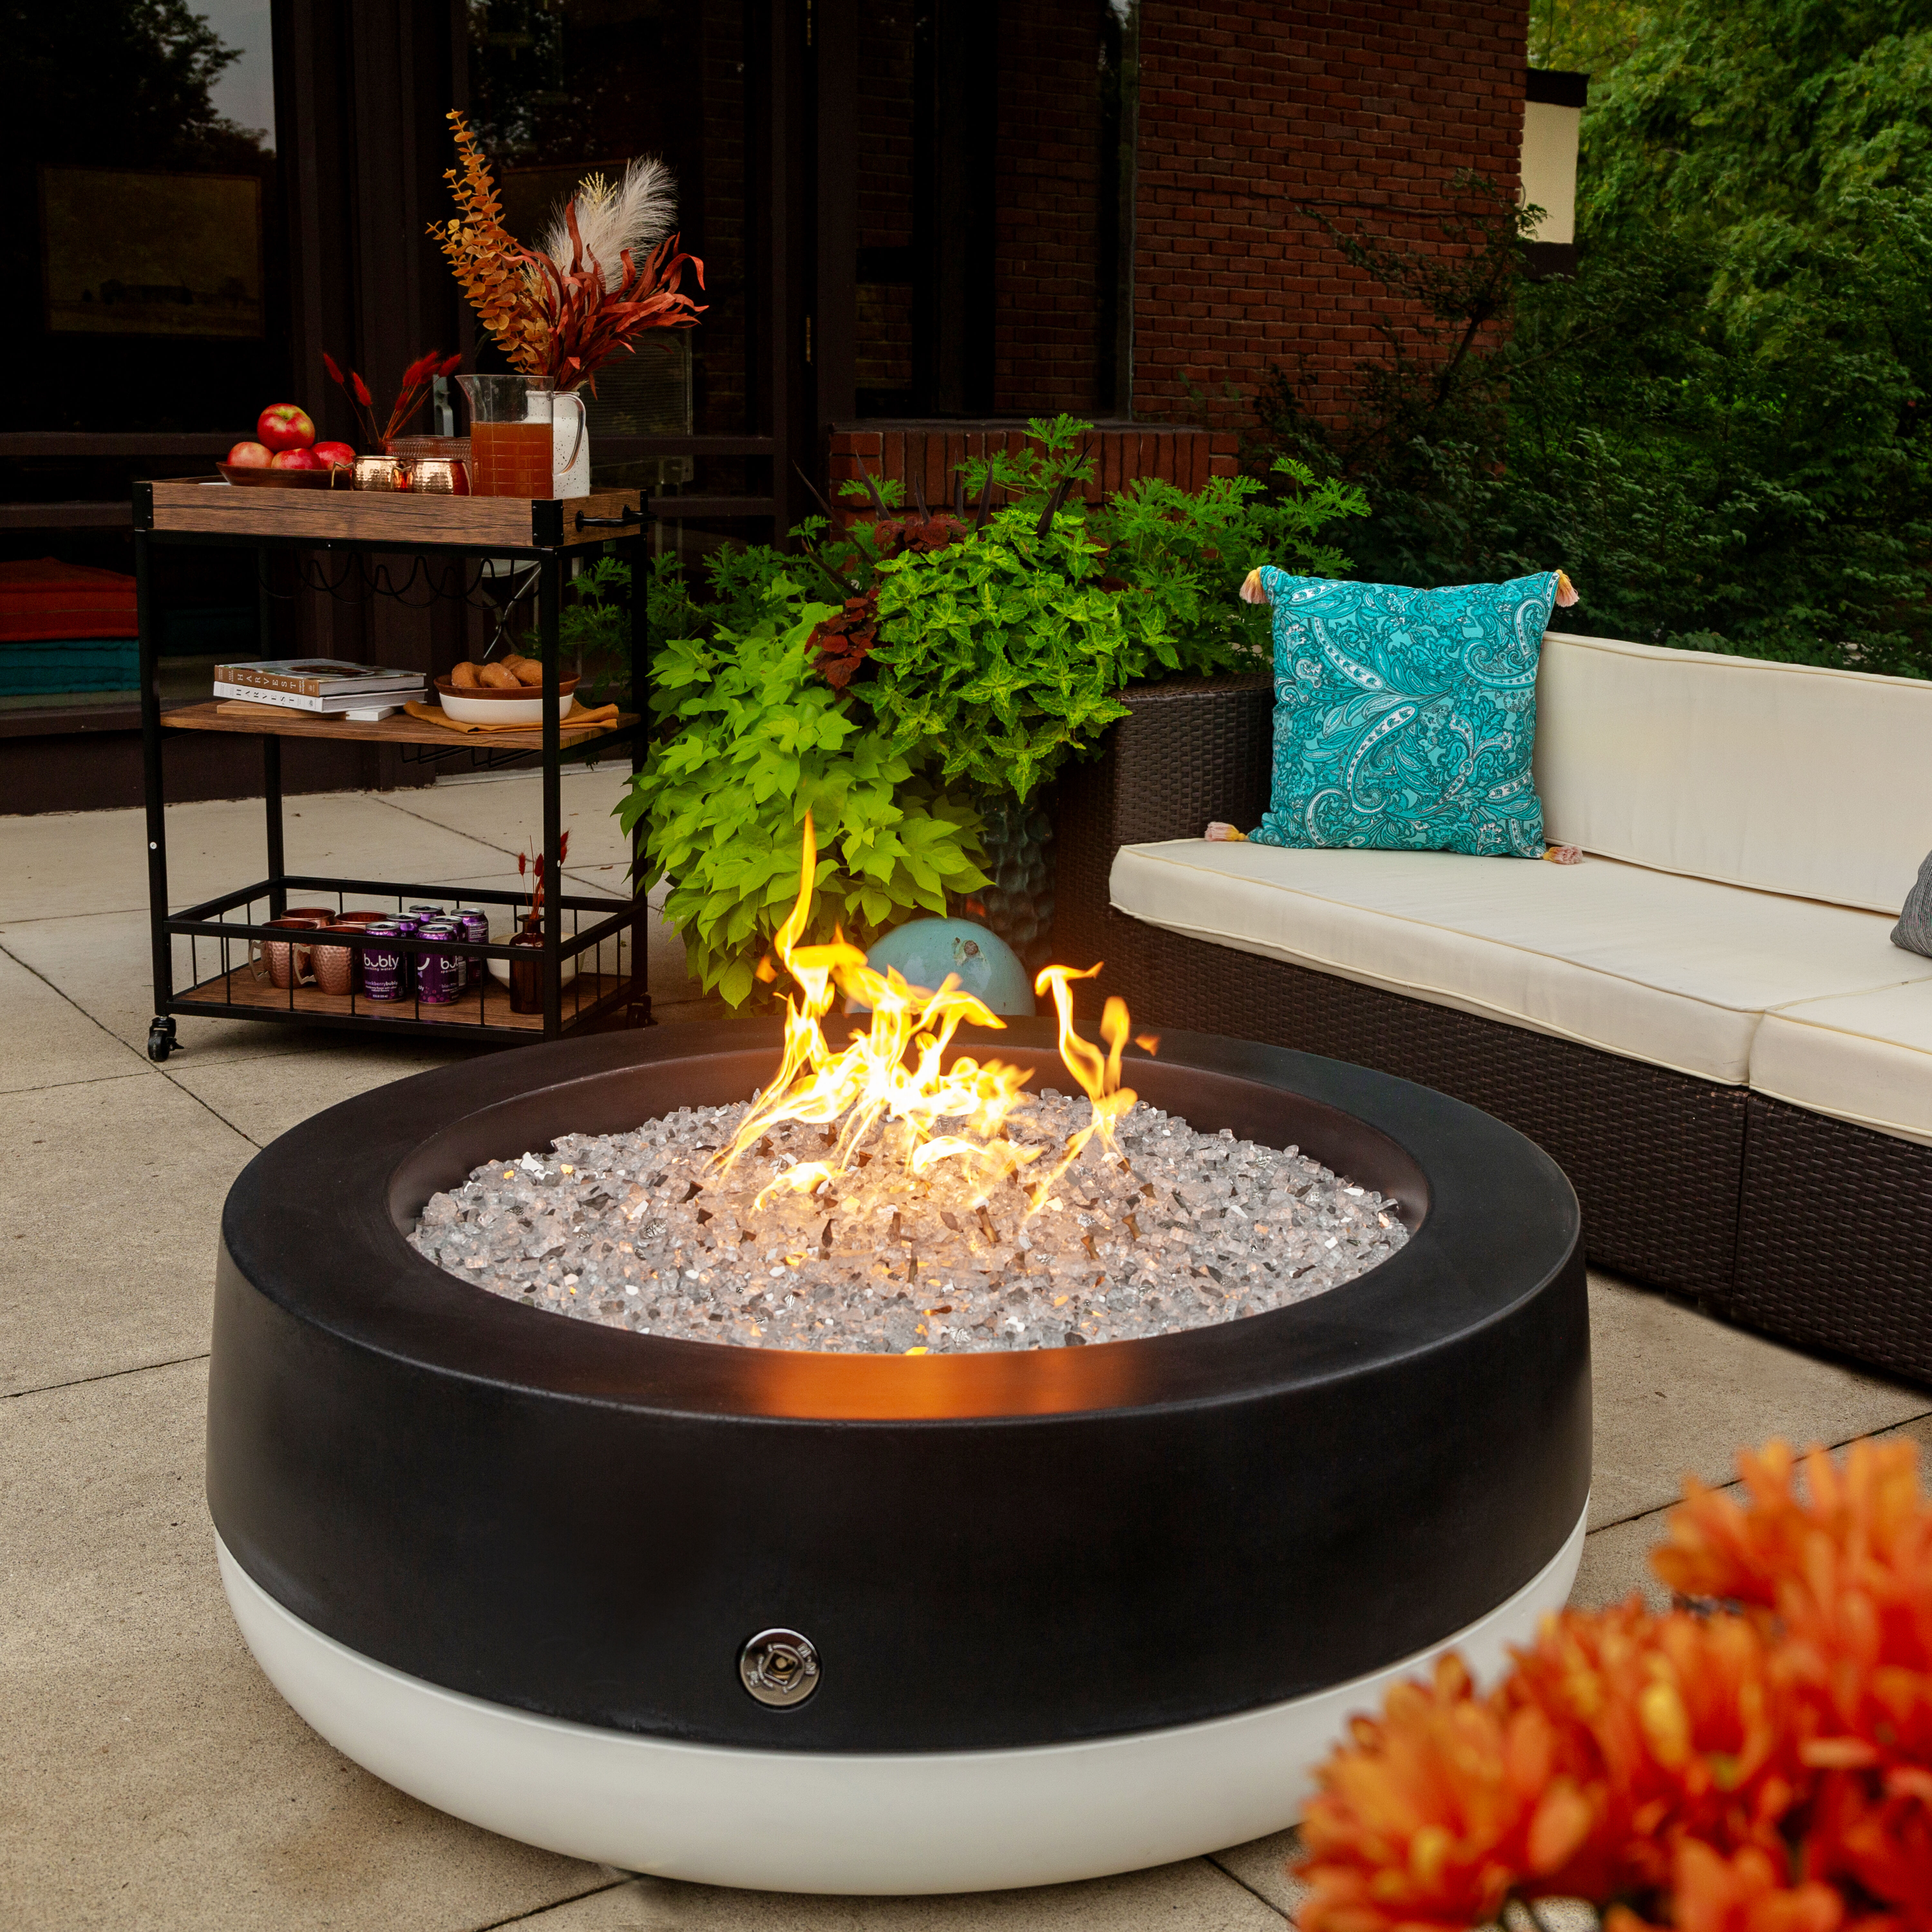 The FlameCraft Black and White Tondo Gas Fire Pit on a concrete patio with black and beige furniture, a wooden bar cart with refreshments, and lush green plants.